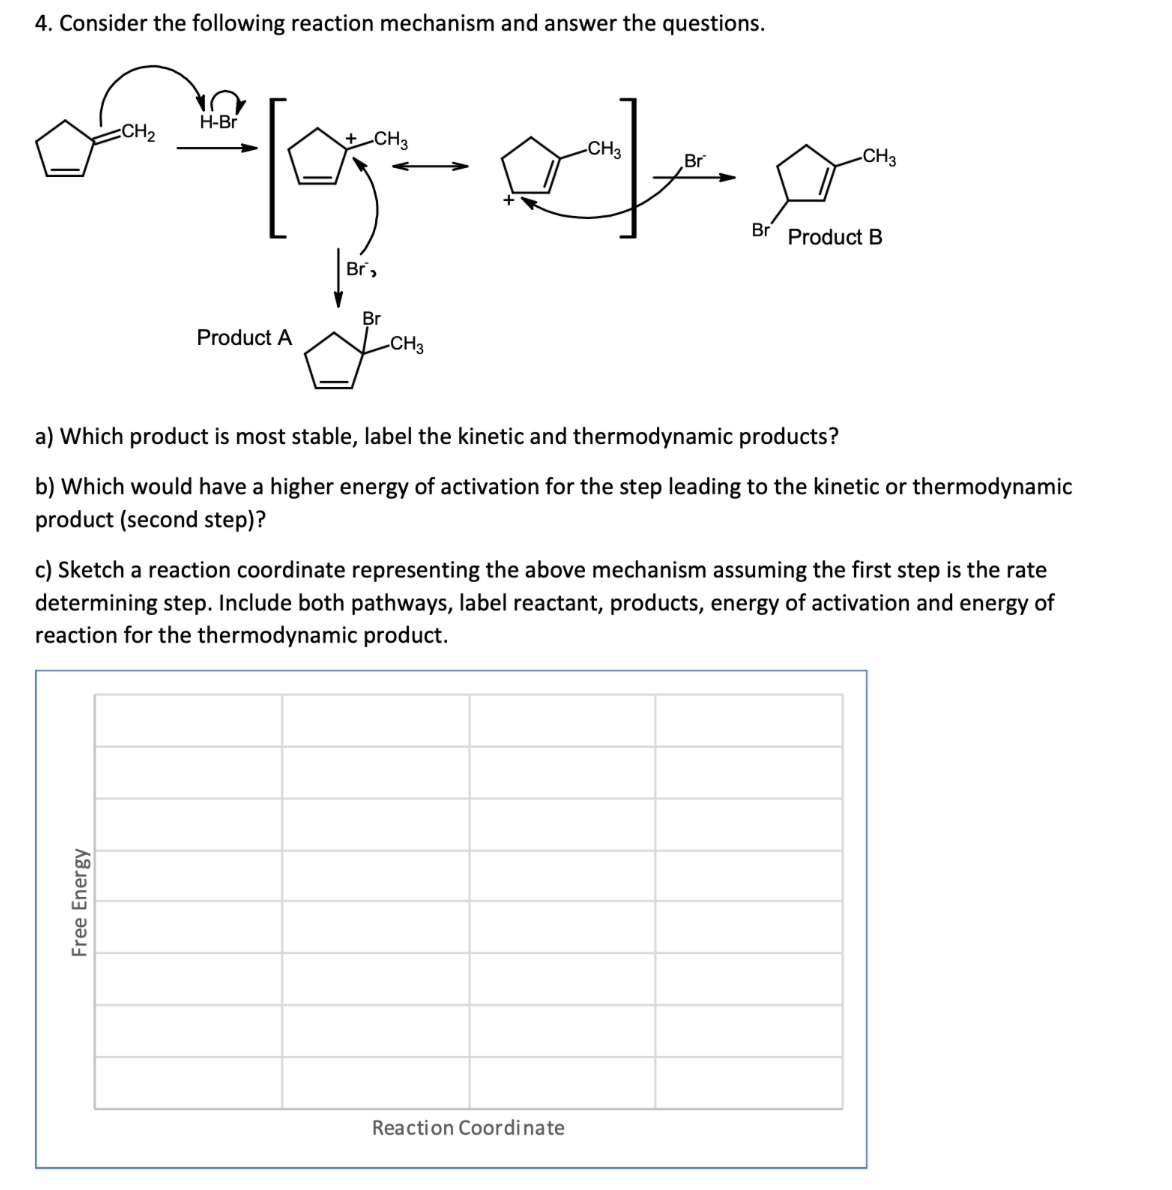 4. Consider the following reaction mechanism and answer the questions.
H-Br
CH2
-CH3
-CH3
-CH3
Br
Br
Product B
Br,
Br
Product A
-CH3
a) Which product is most stable, label the kinetic and thermodynamic products?
b) Which would have a higher energy of activation for the step leading to the kinetic or thermodynamic
product (second step)?
c) Sketch a reaction coordinate representing the above mechanism assuming the first step is the rate
determining step. Include both pathways, label reactant, products, energy of activation and energy of
reaction for the thermodynamic product.
Reaction Coordinate
Free Energy
